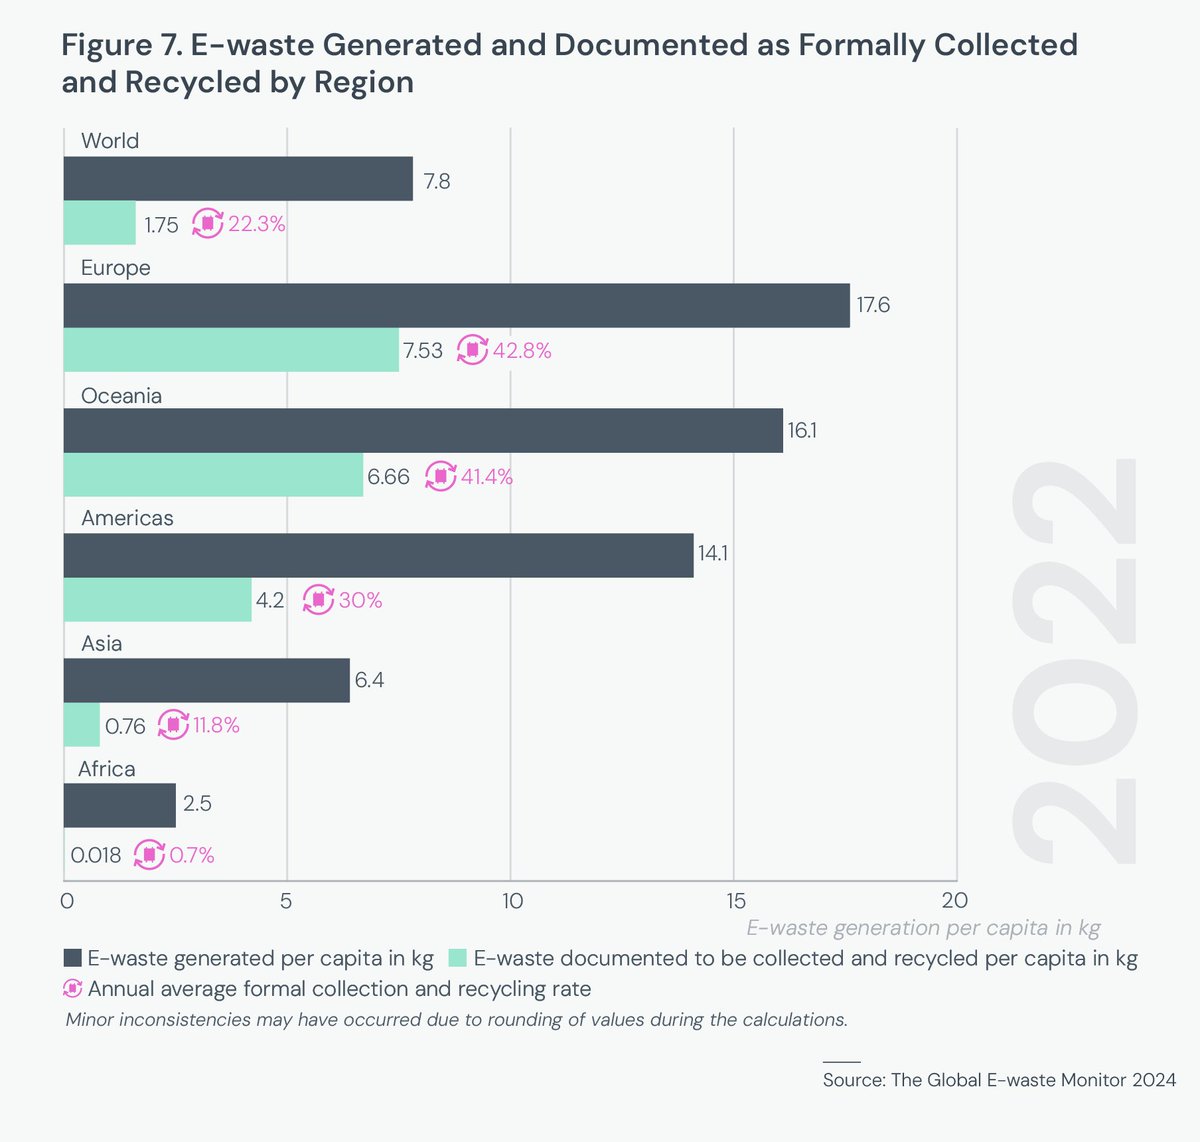 #eWaste in numbers📊 Out of 7.8 kg of e-waste generated per capita globally, only 1.75 kg is documented to be collected and recycled. That leaves a significant portion unaccounted for, posing environmental and health risks. ➡ More on this growing issue: ewastemonitor.info/national-e-was…